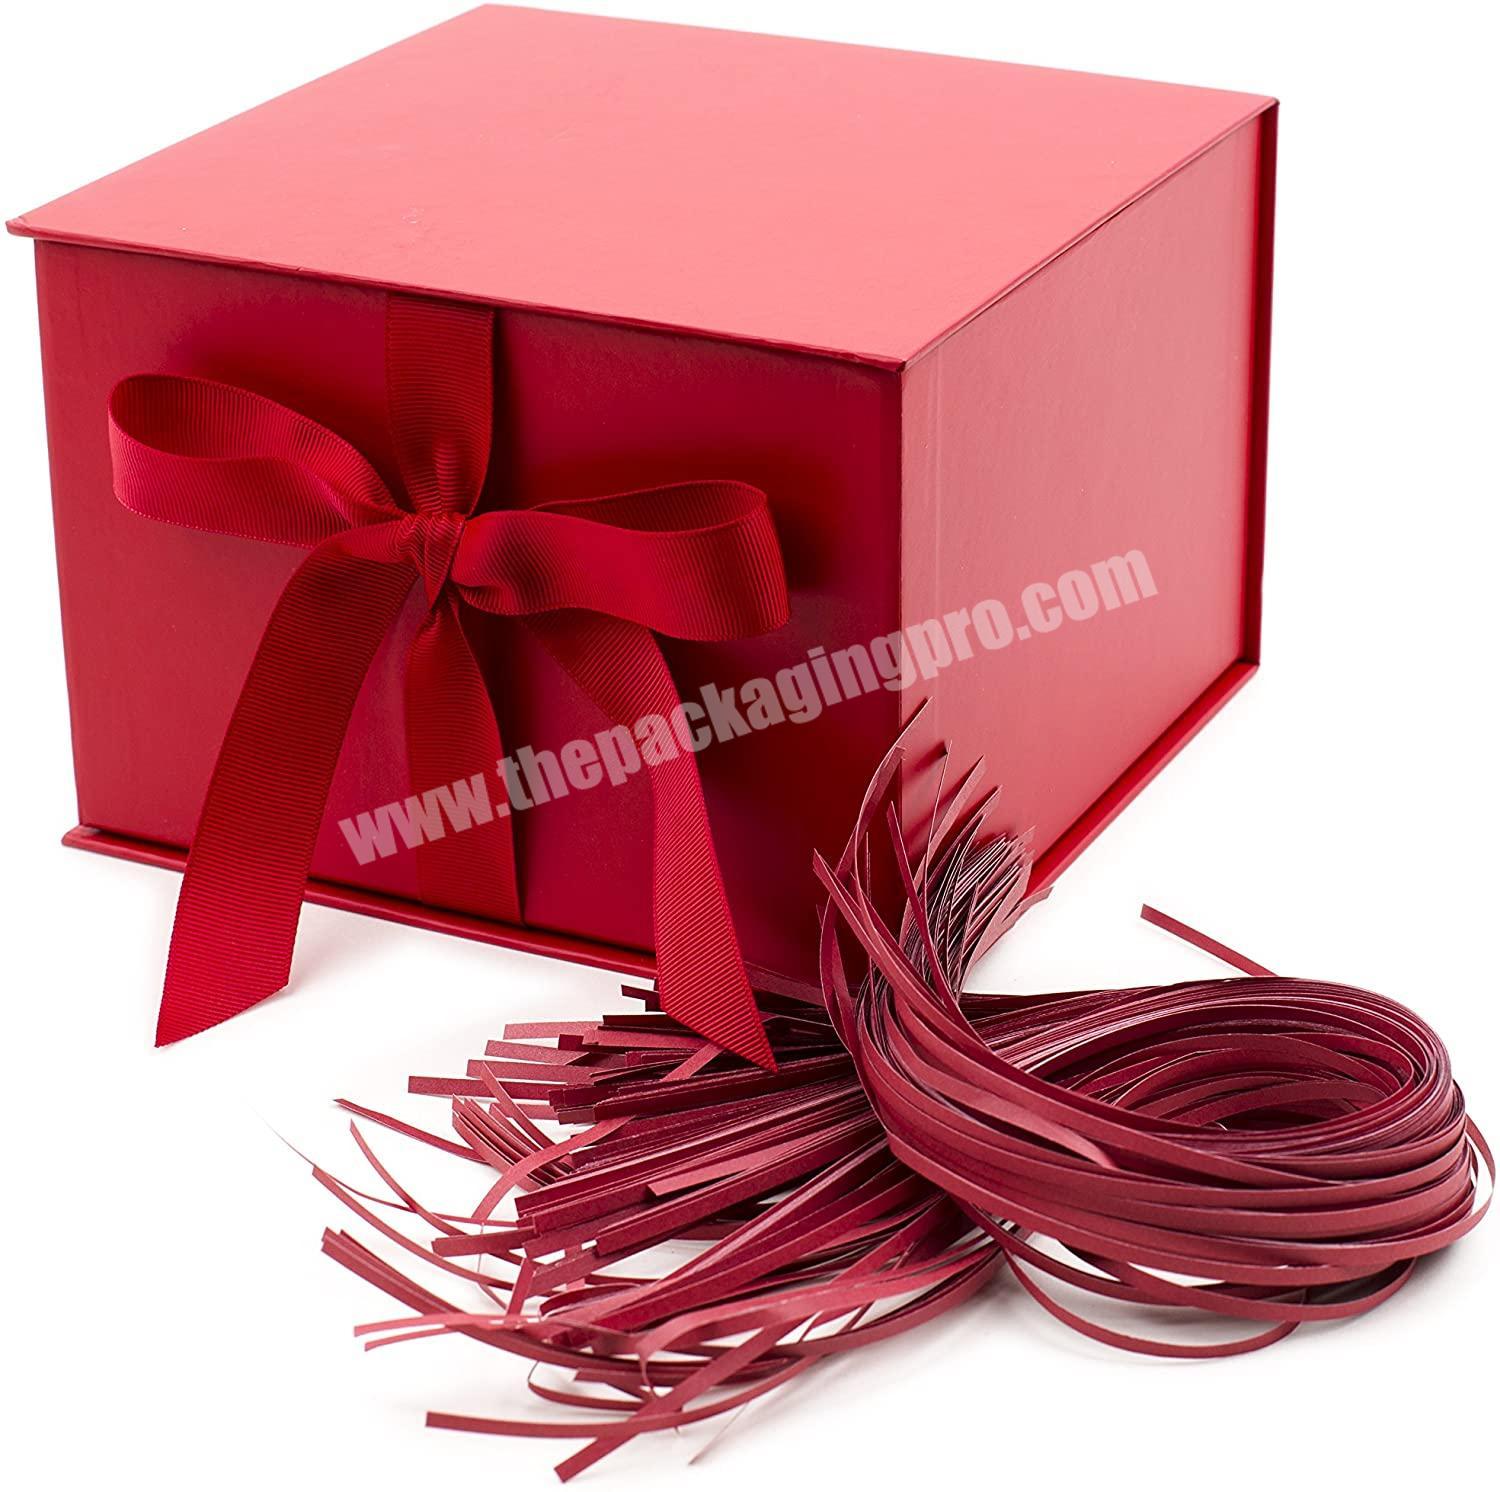 biodegradable gift box weeding gift box red magnetic gift box